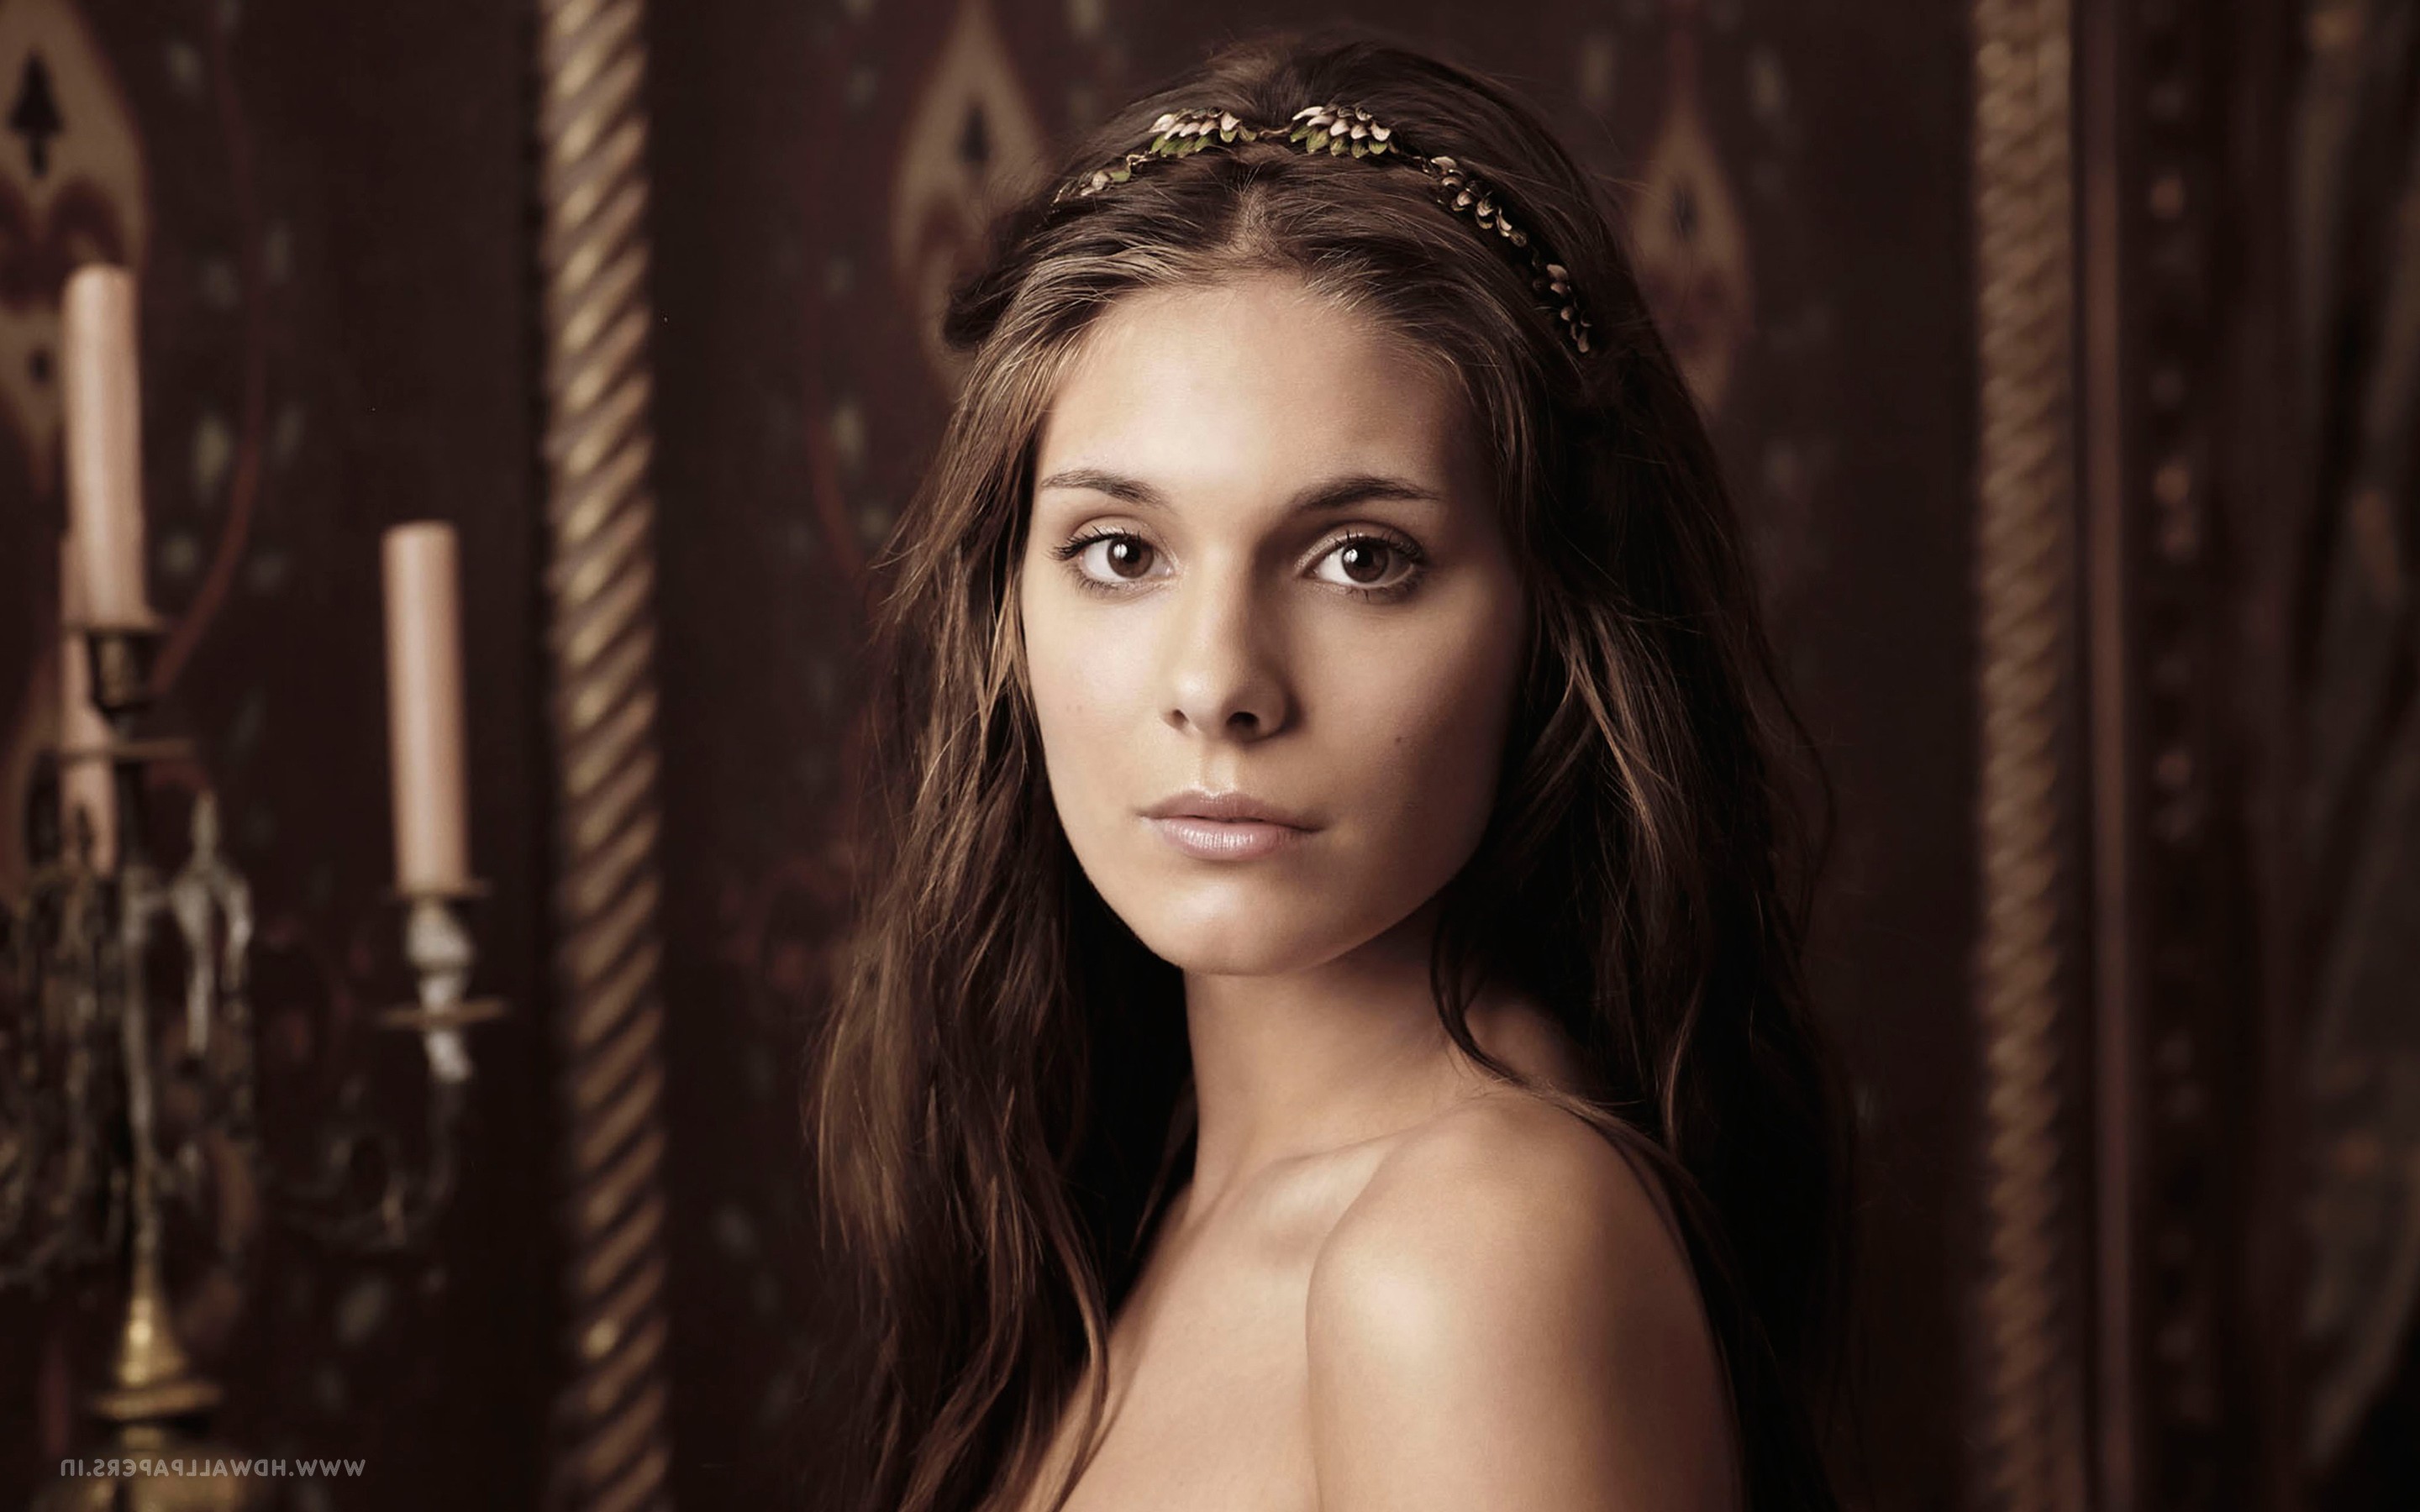 Caitlin Stasey Backgrounds, Compatible - PC, Mobile, Gadgets| 2880x1800 px